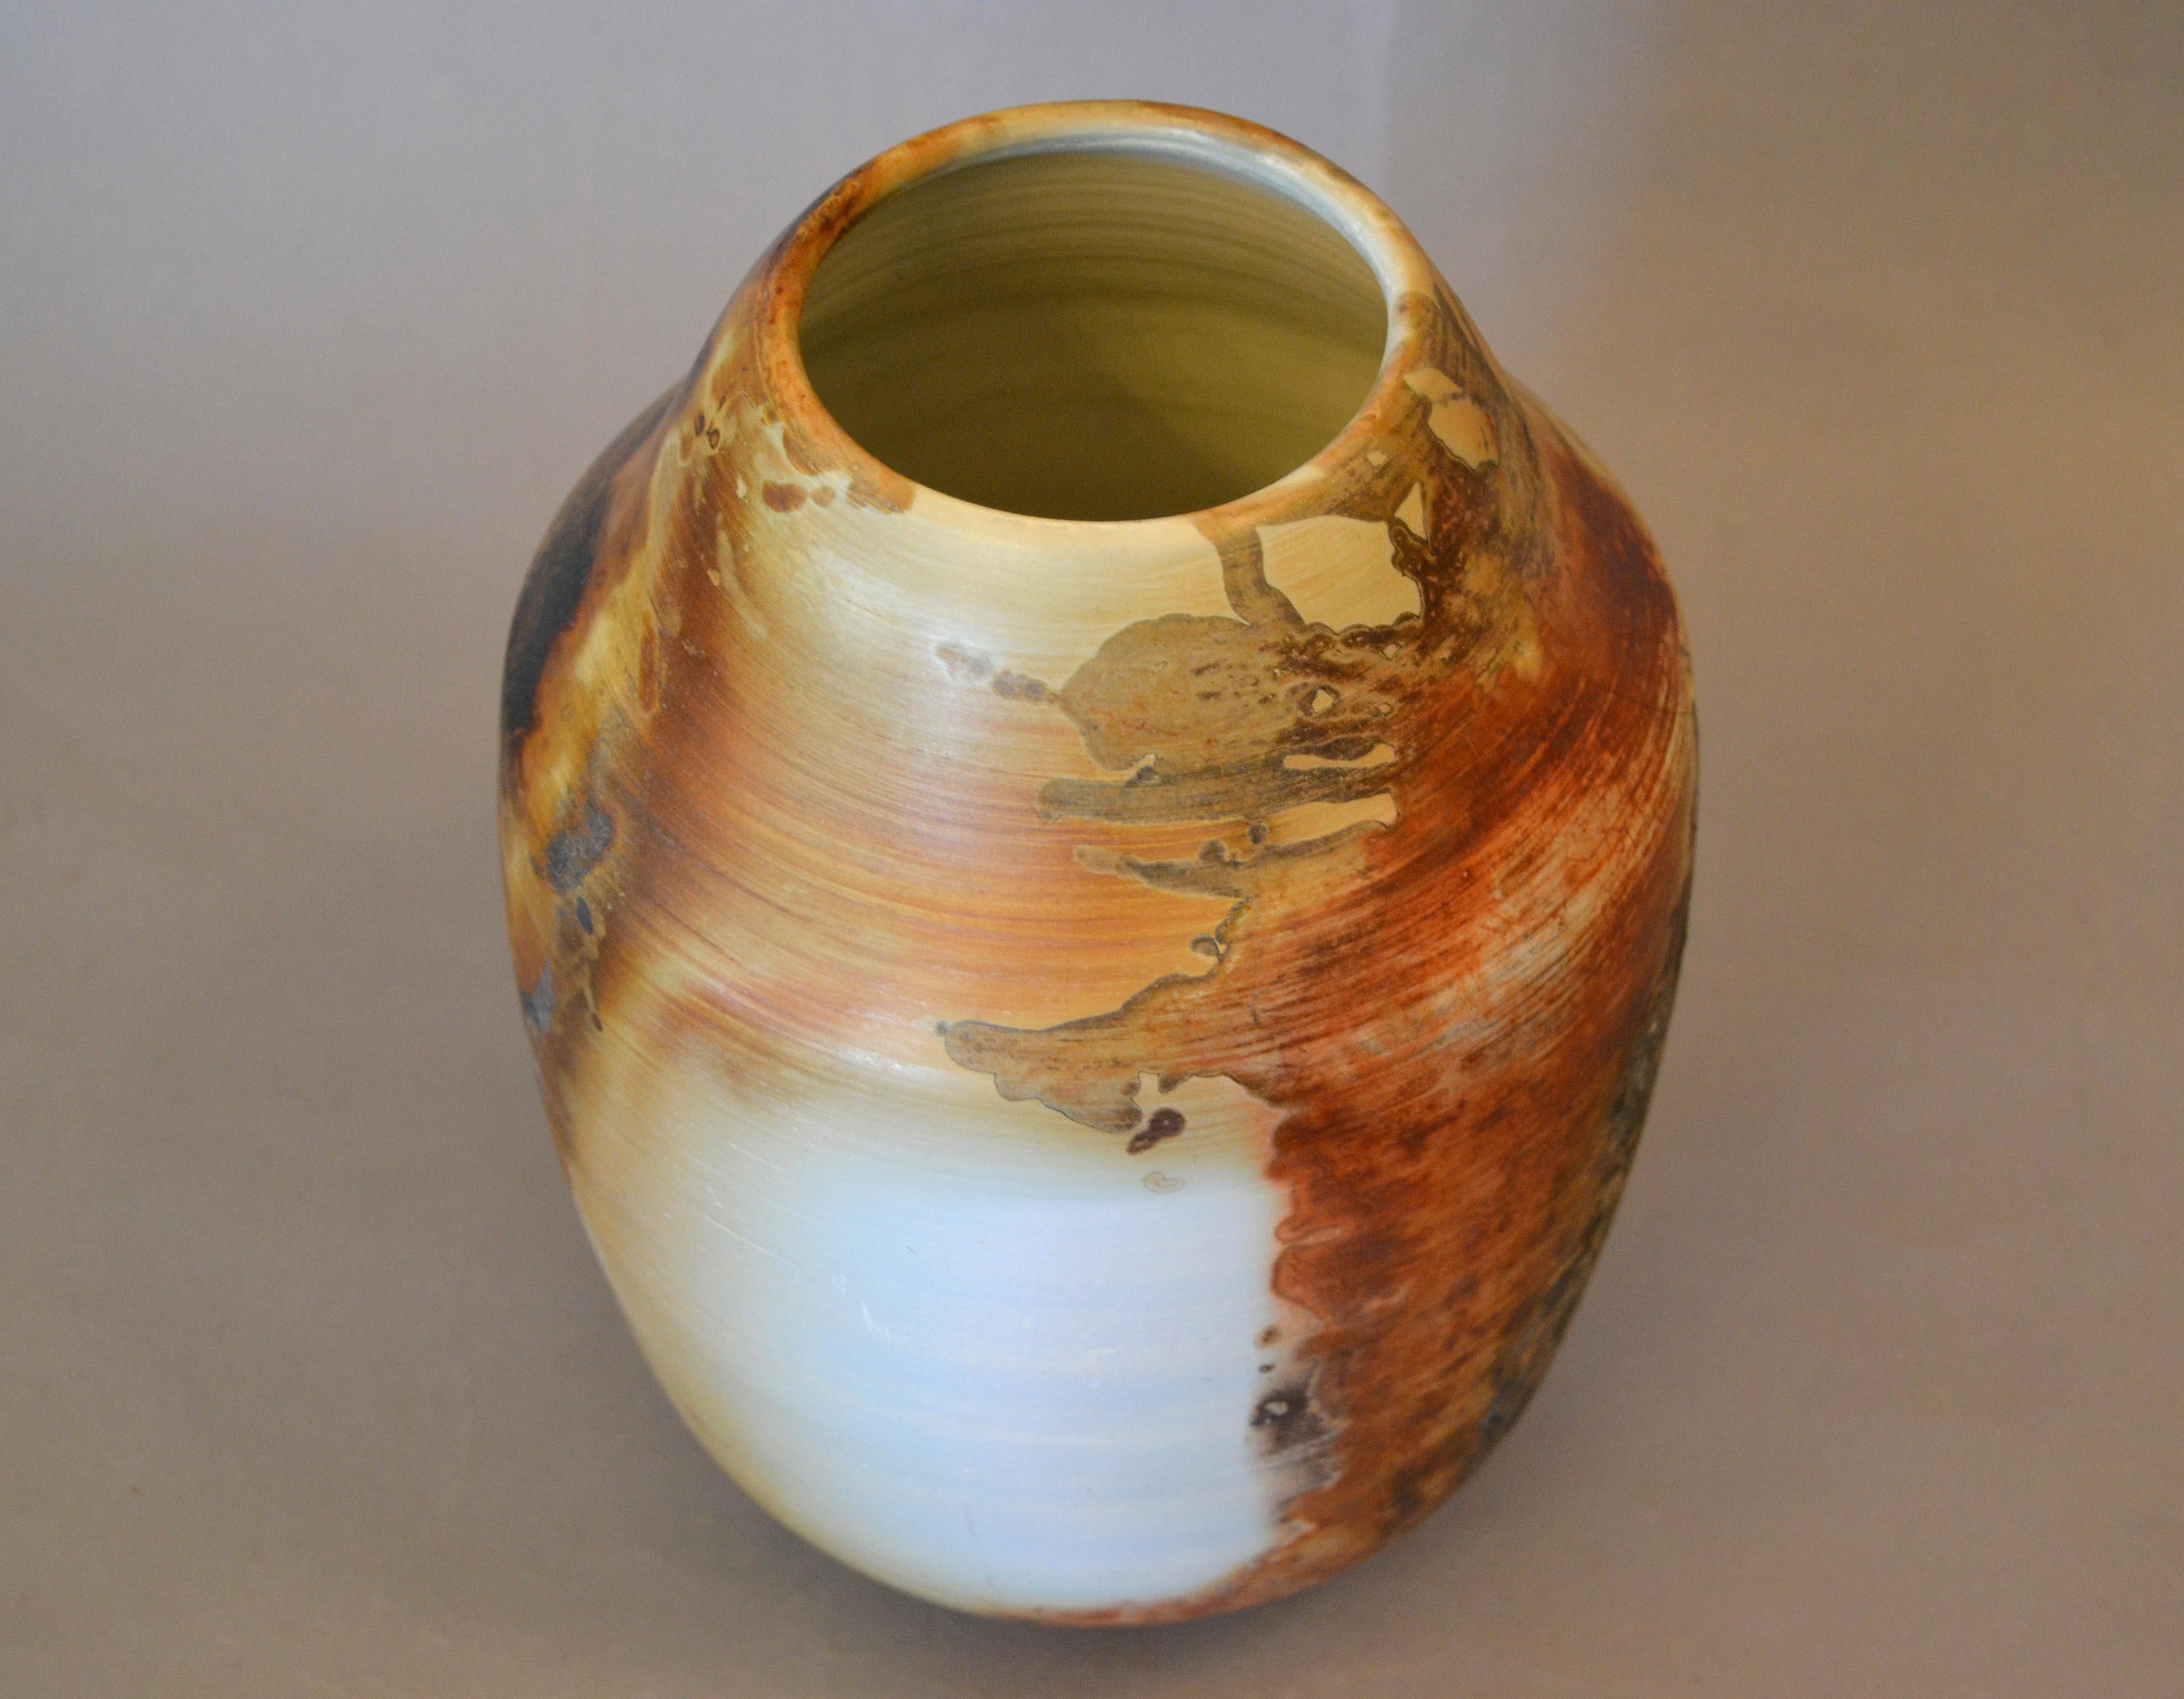 We offer a stunning Earthenware clay fired pottery vase in hues of brown and white in the style of Nemadji. The inside is glazed.
An amazing craftsmanship with the Native American touch.
Unknown marks at the base.